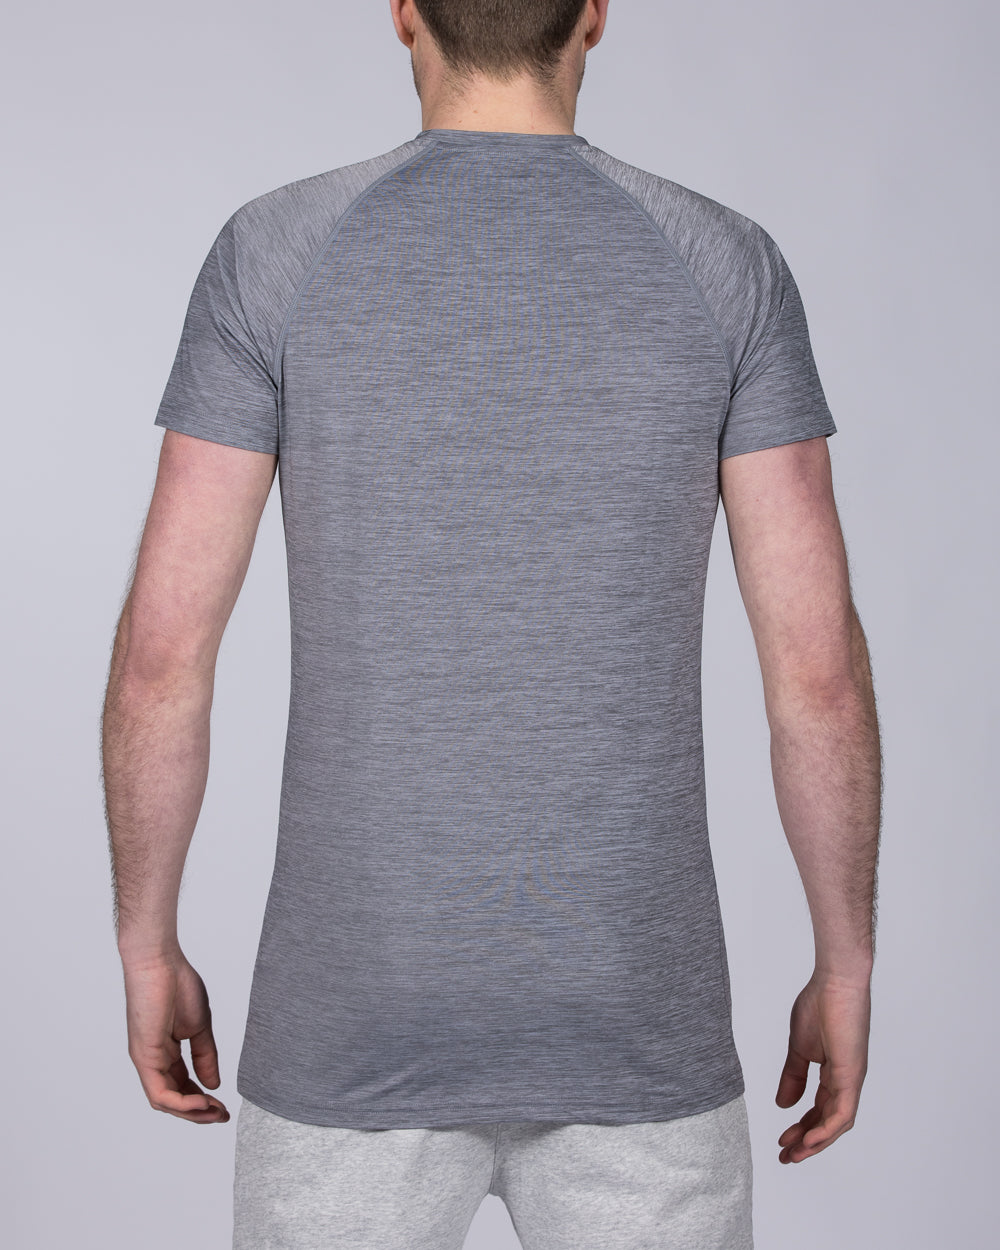 2t Tall Athletic Training Top (grey)